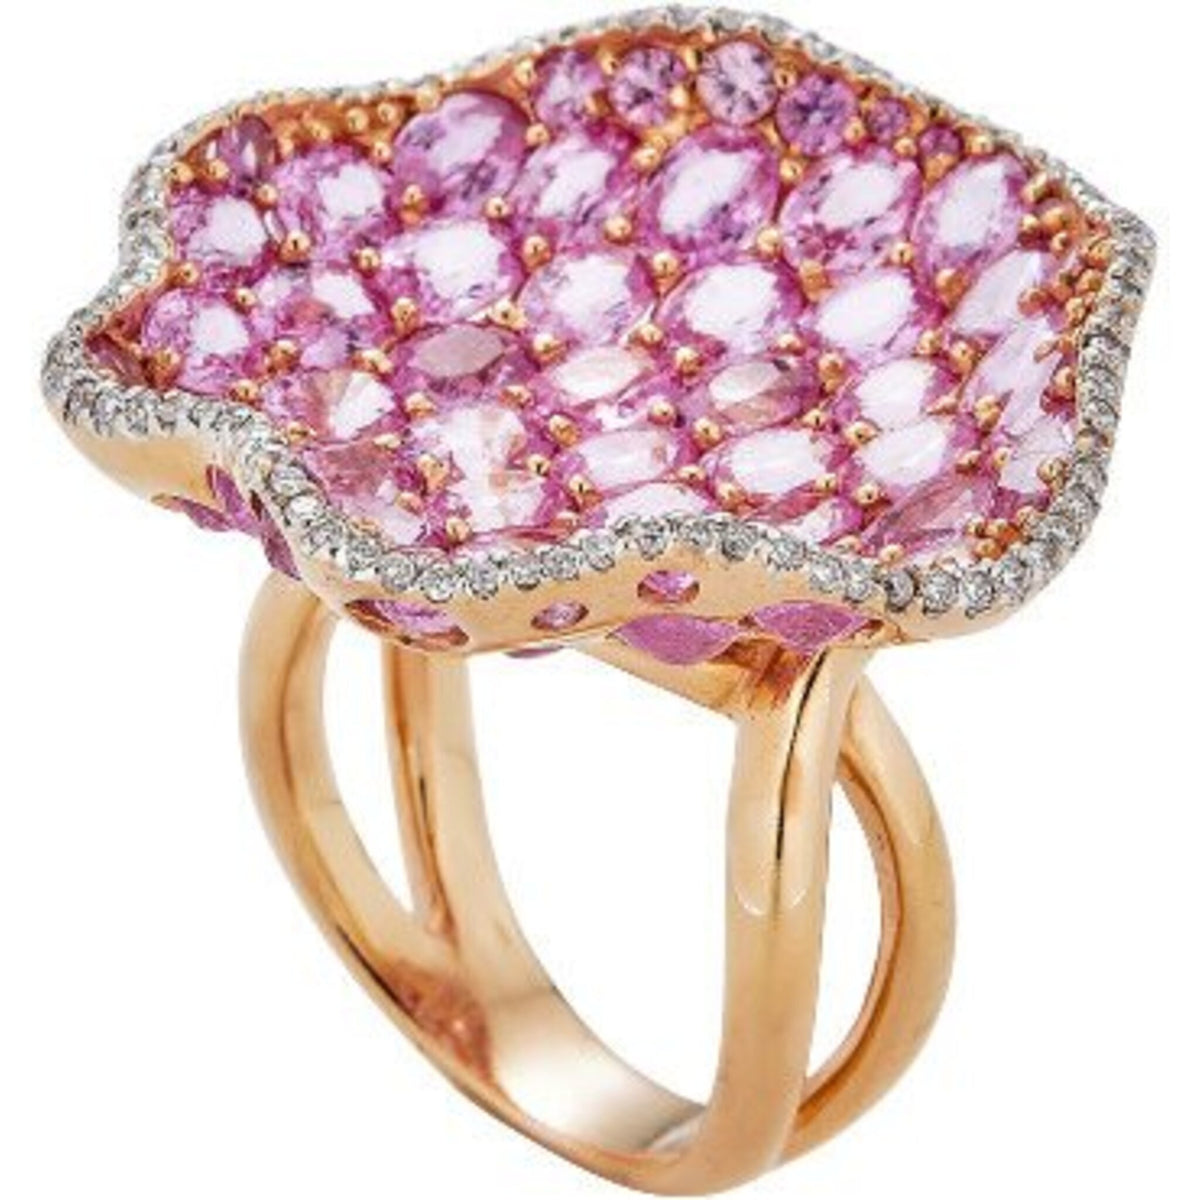 Piranesi - Wave Mosaique Ring in Pink Sapphire - 18K Yellow and Rose Gold